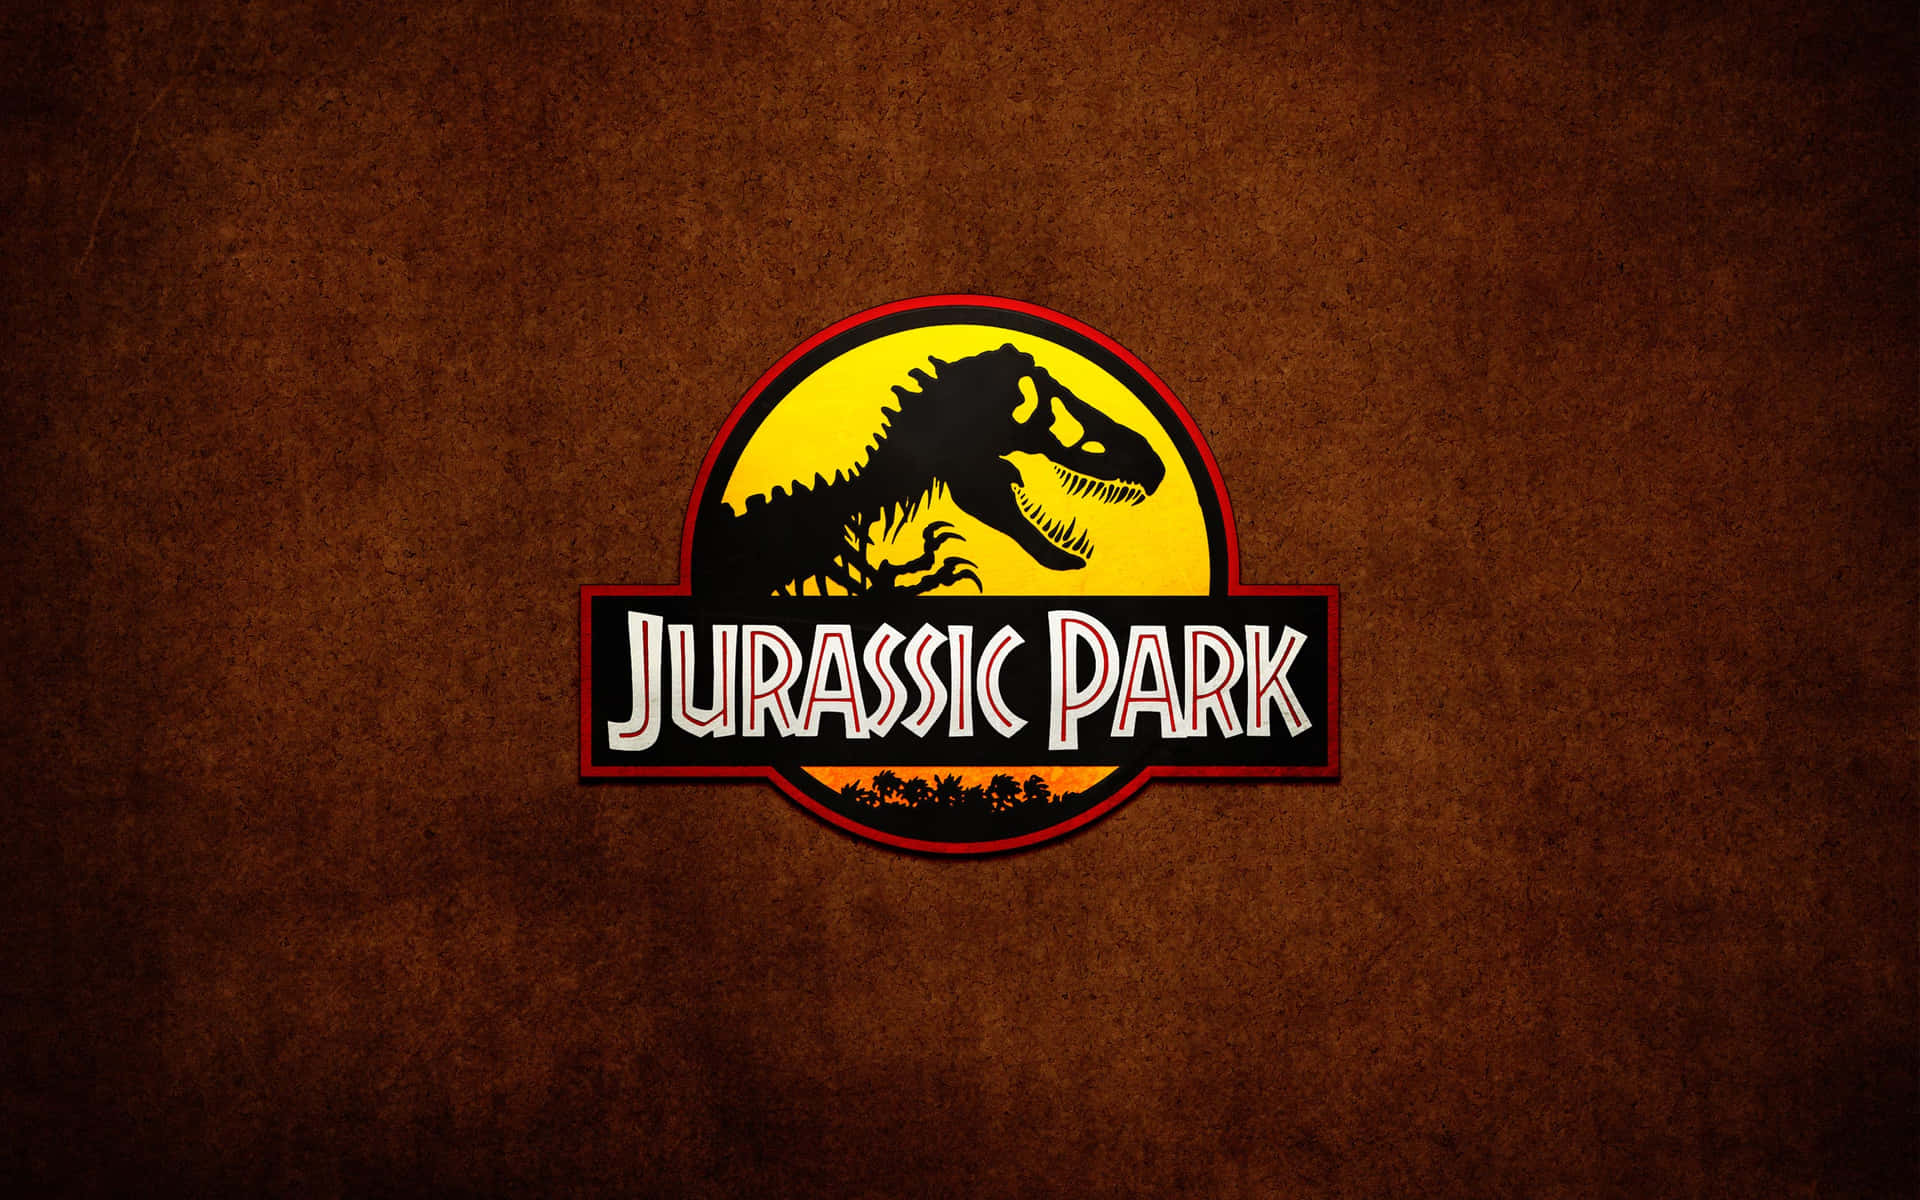 Go back in time to Jurassic Park with a Zoom meeting Background